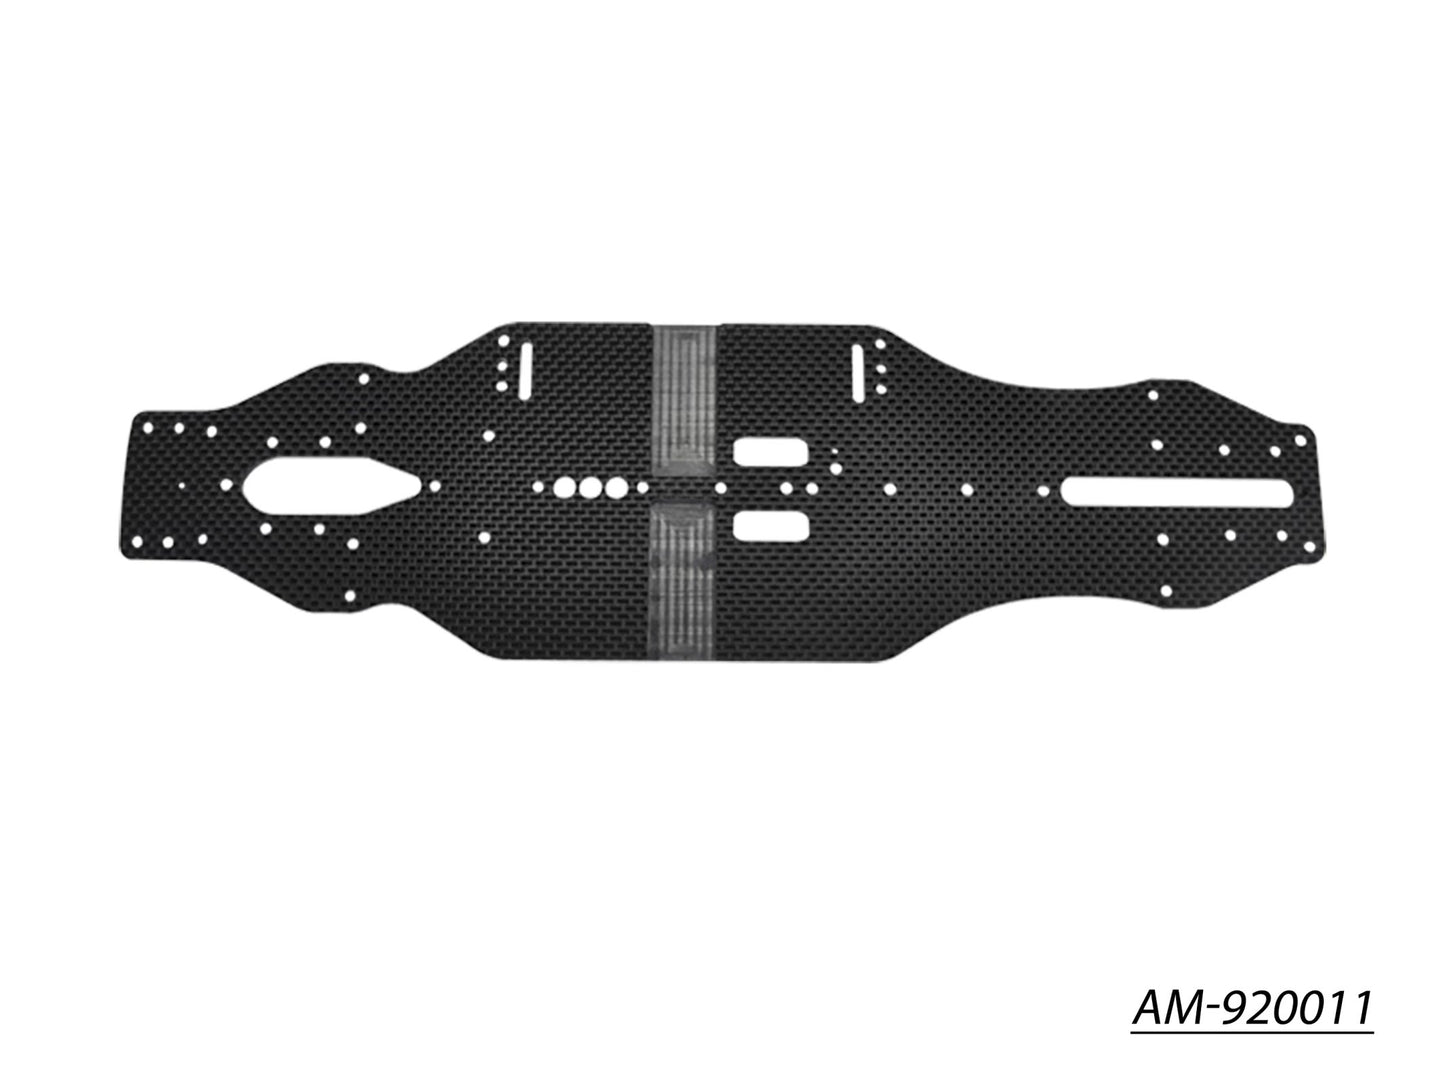 AM Medius Xray T4 FWD Chassis Carbon 2.25mm MM (AM-920011)